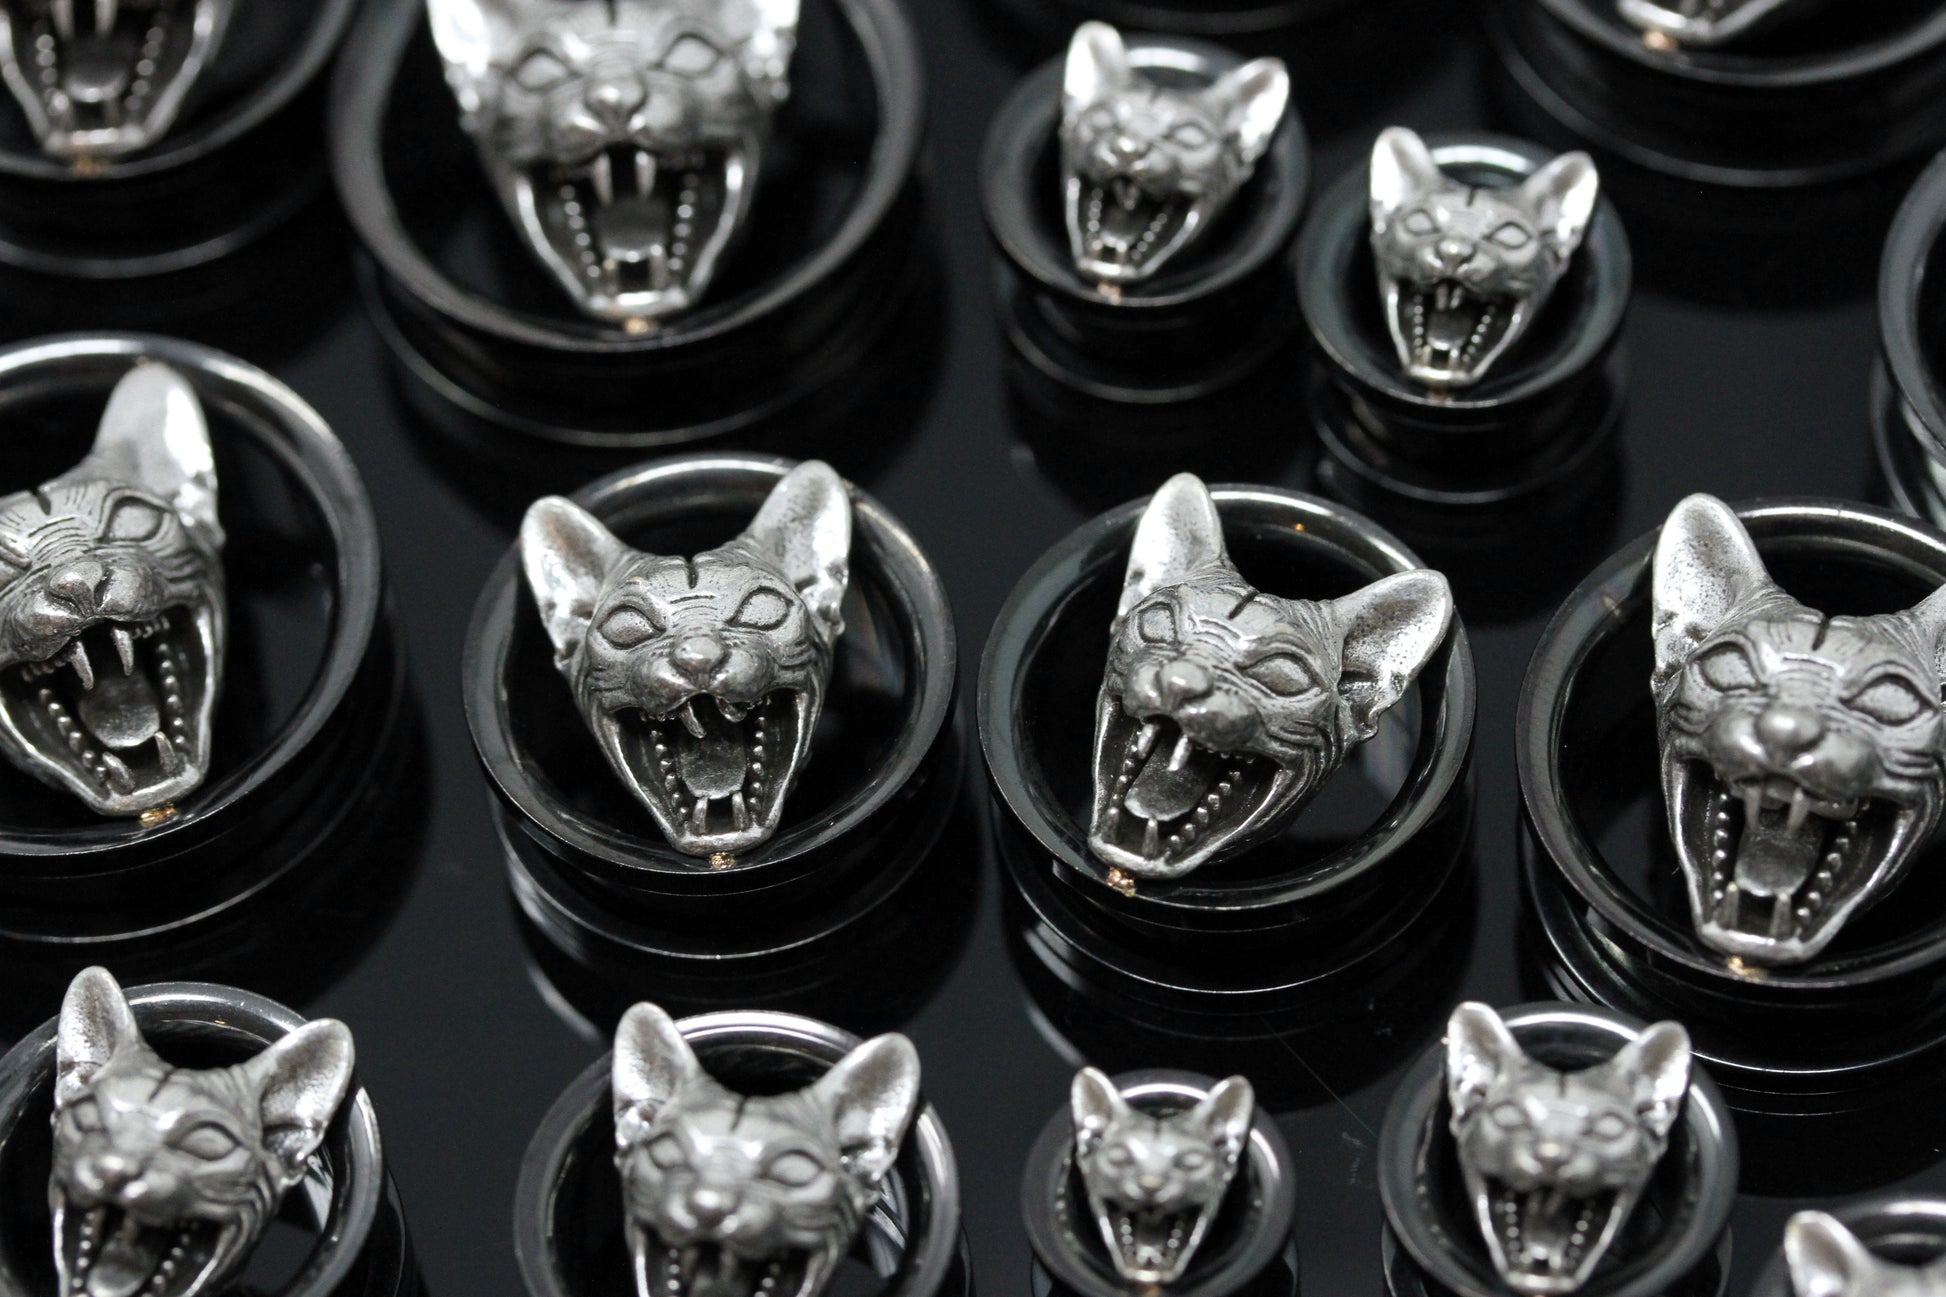 Black stainless steel cat tunnels